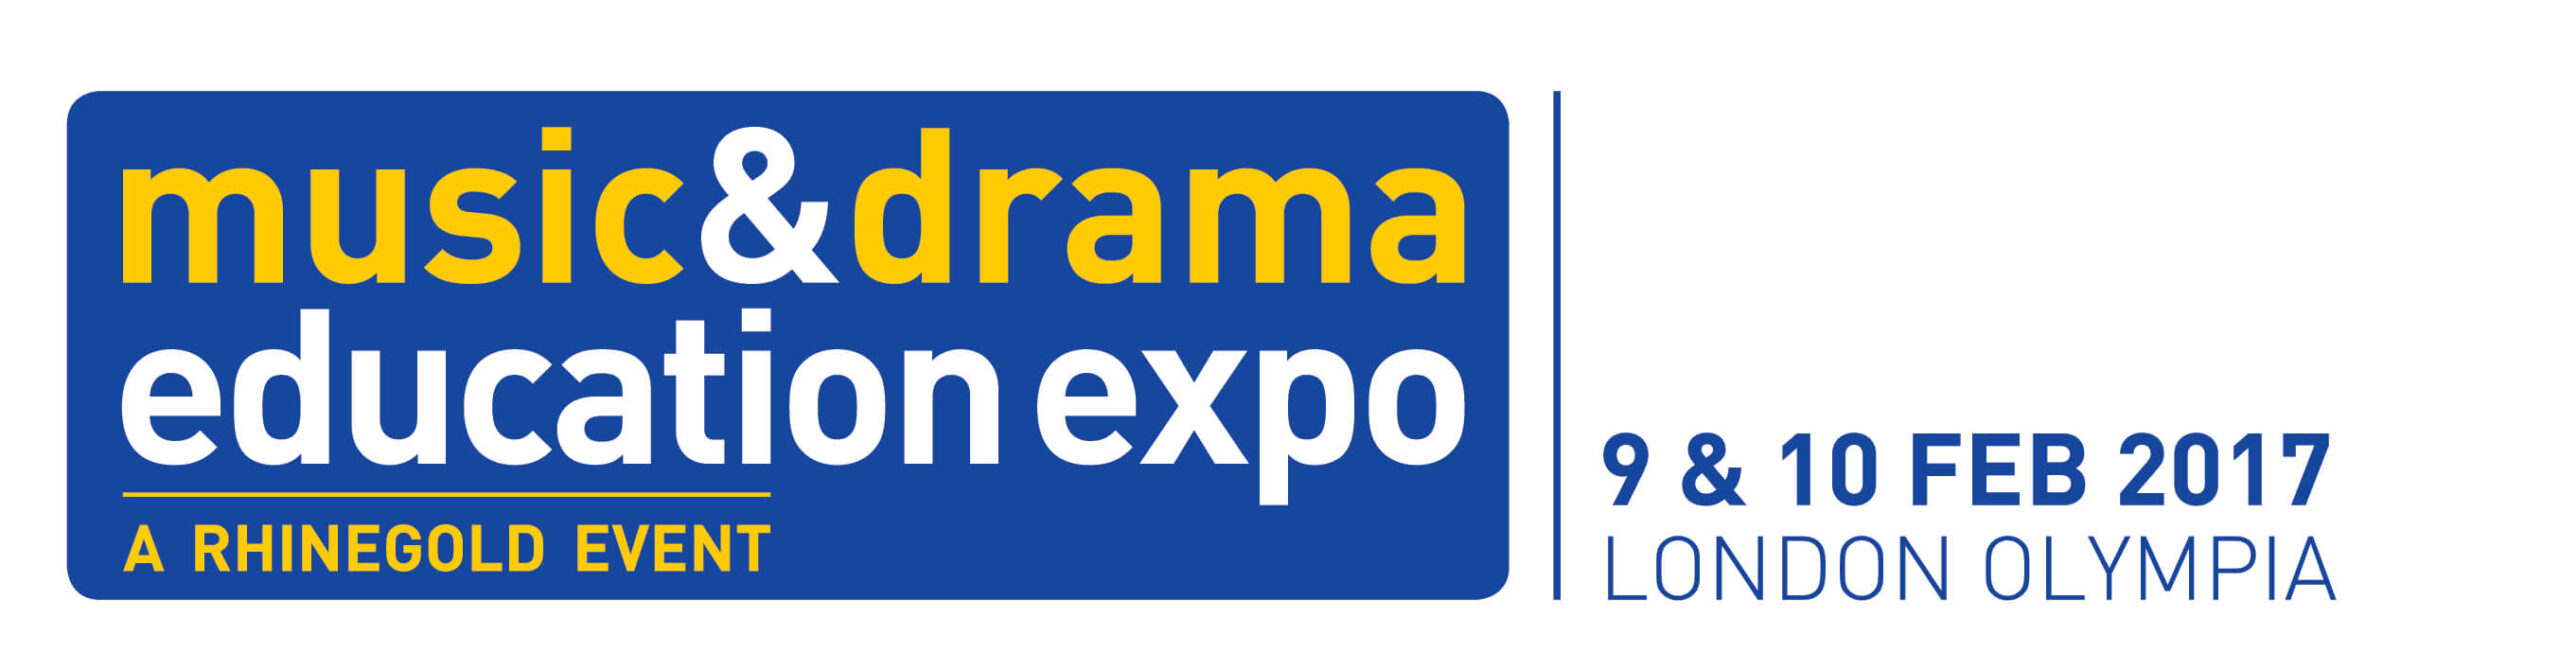 EMMA for Peace joins Music & Drama Education Expo